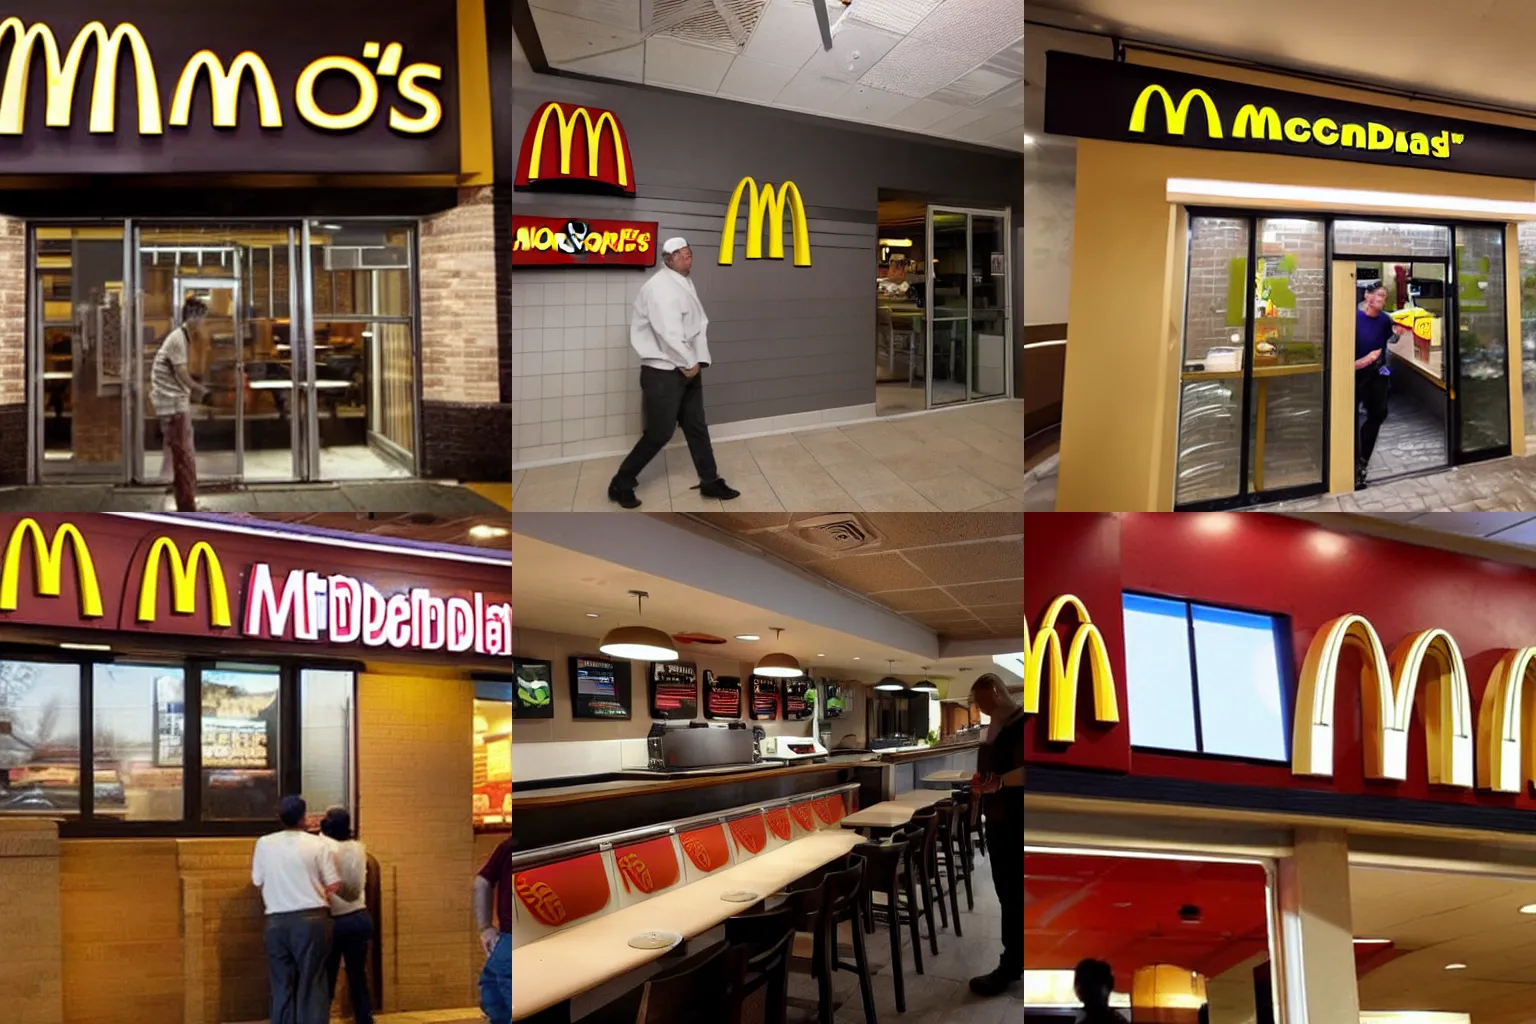 Prompt: man discovers a secret McDonalds restaurant, full of customers, behind a wall in his basement